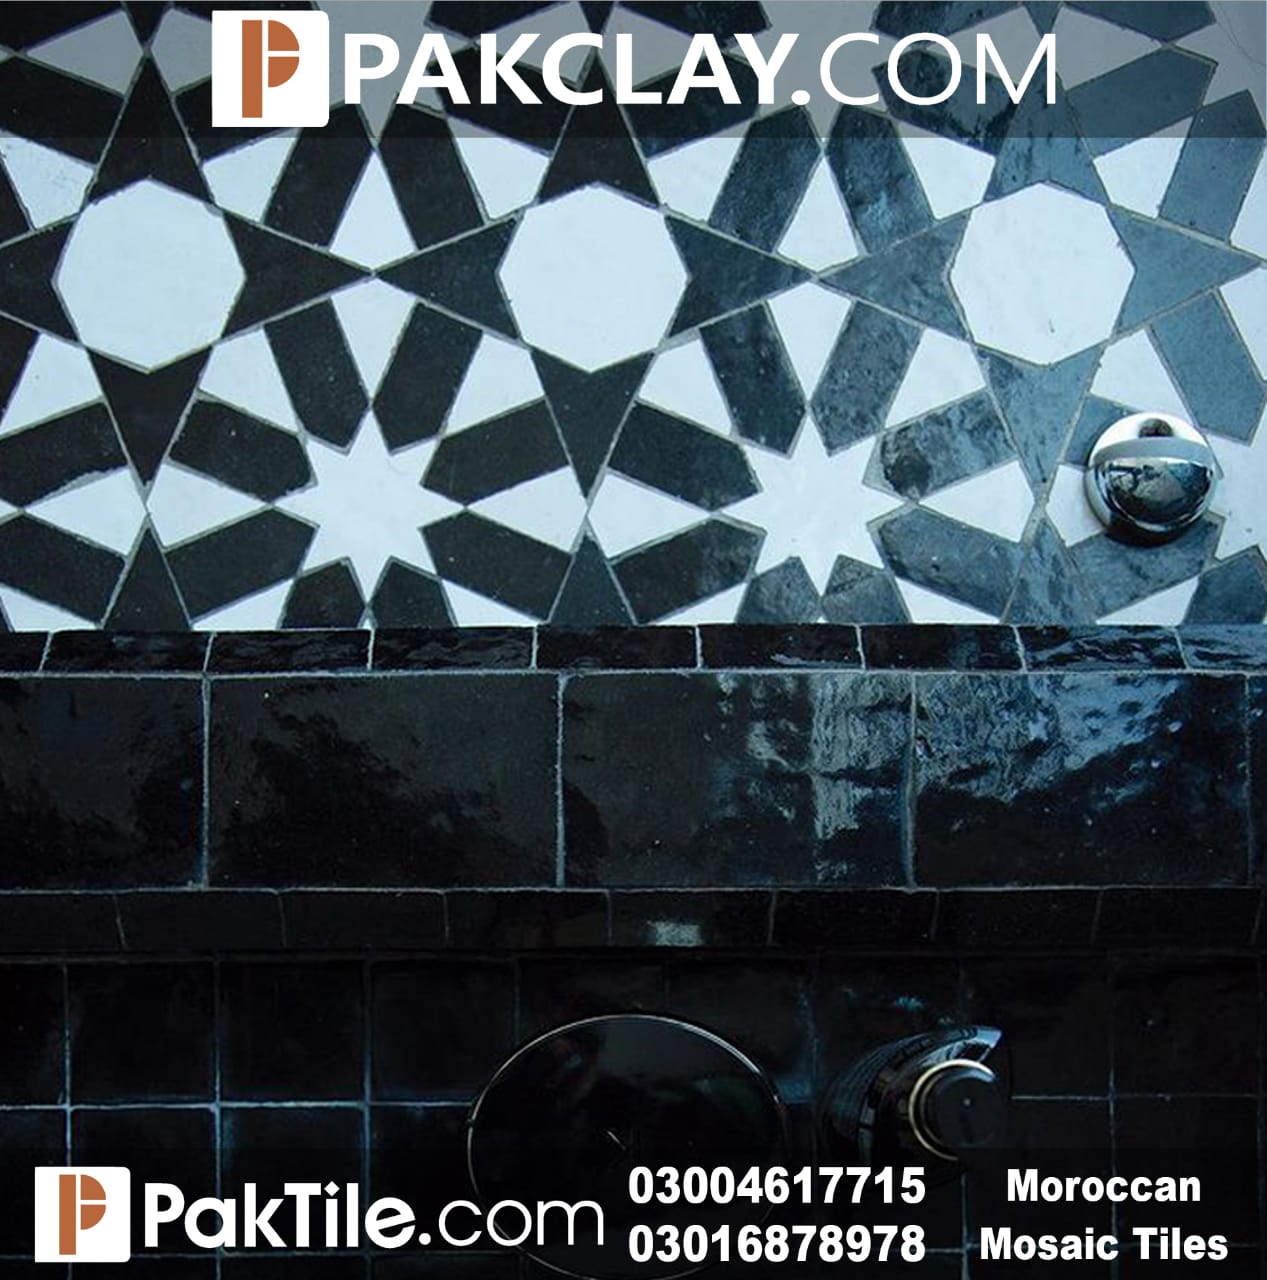 Pak Clay Moroccan Mosaic Tiles in Islamabad